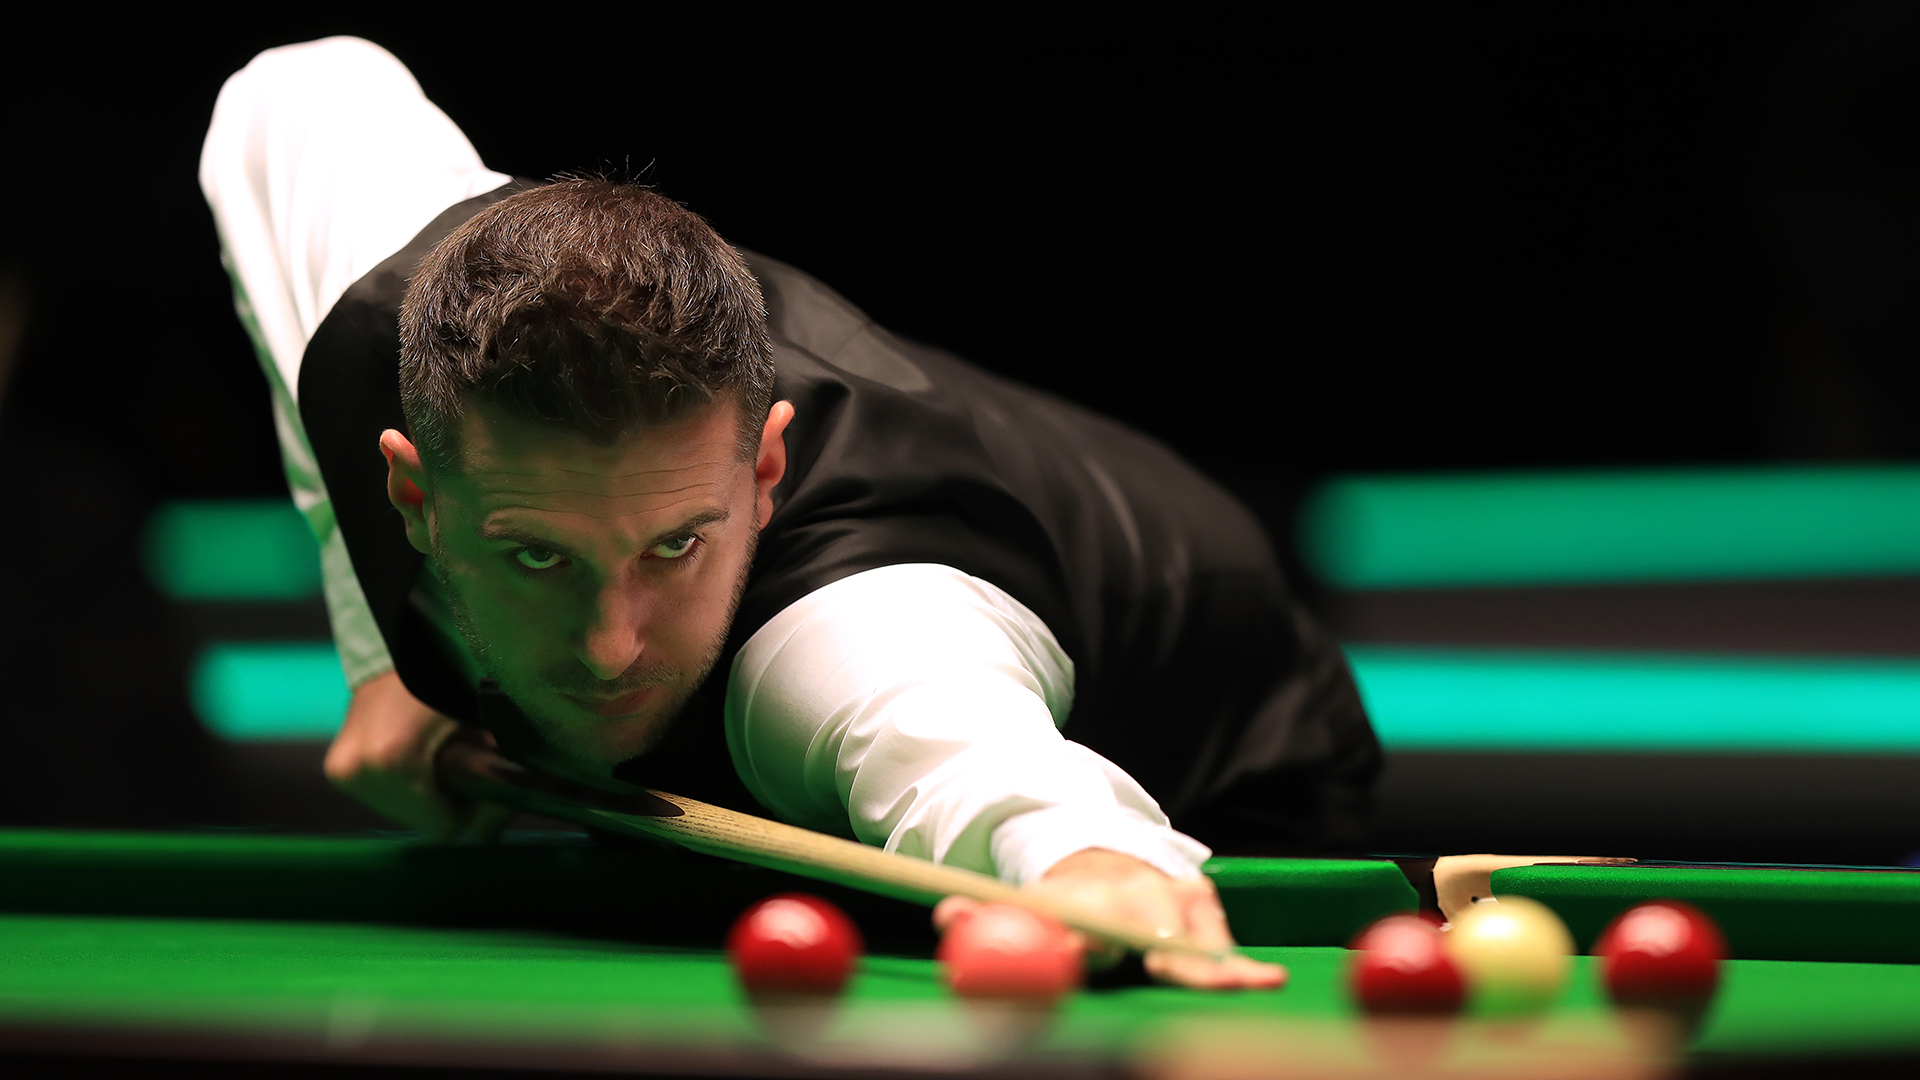 European Masters snooker Draw, schedule, results, how to watch on TV